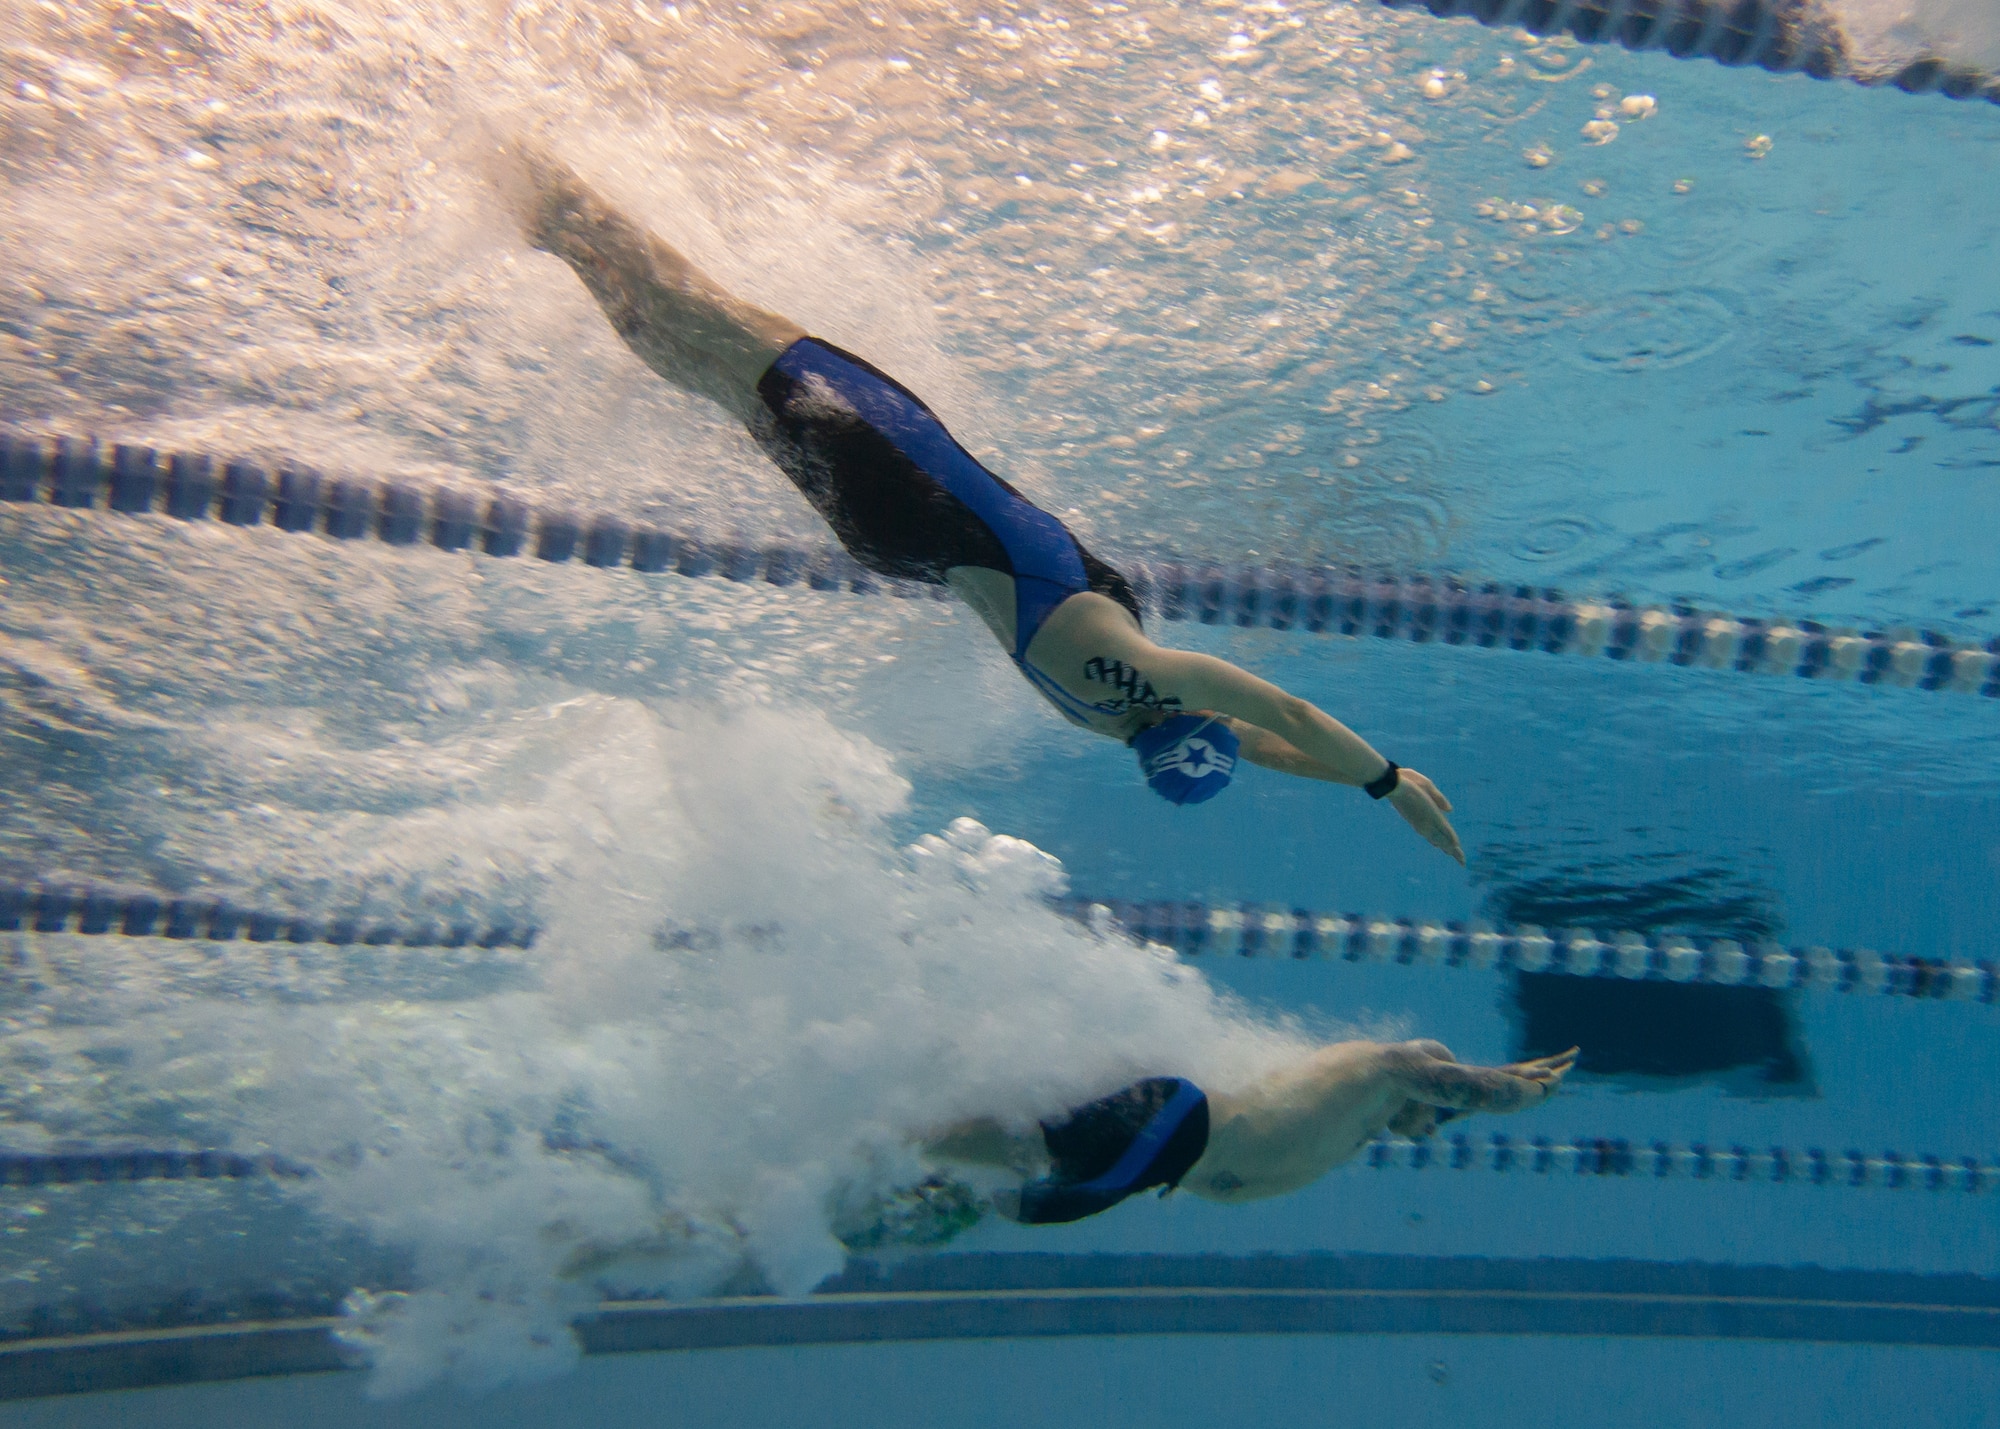 Master Sgt. Lisa Goad, Team Air Force athlete, completes a backstroke dive at the 2018 Department of Defense Warrior Games at the U.S. Air Force Academy in Colorado Springs, Colo. on June 4. The Warrior Games are a Paralympic style athletic competition where Wounded Warriors from all service branches compete against each other. (Photo by Master Sgt. David Long)